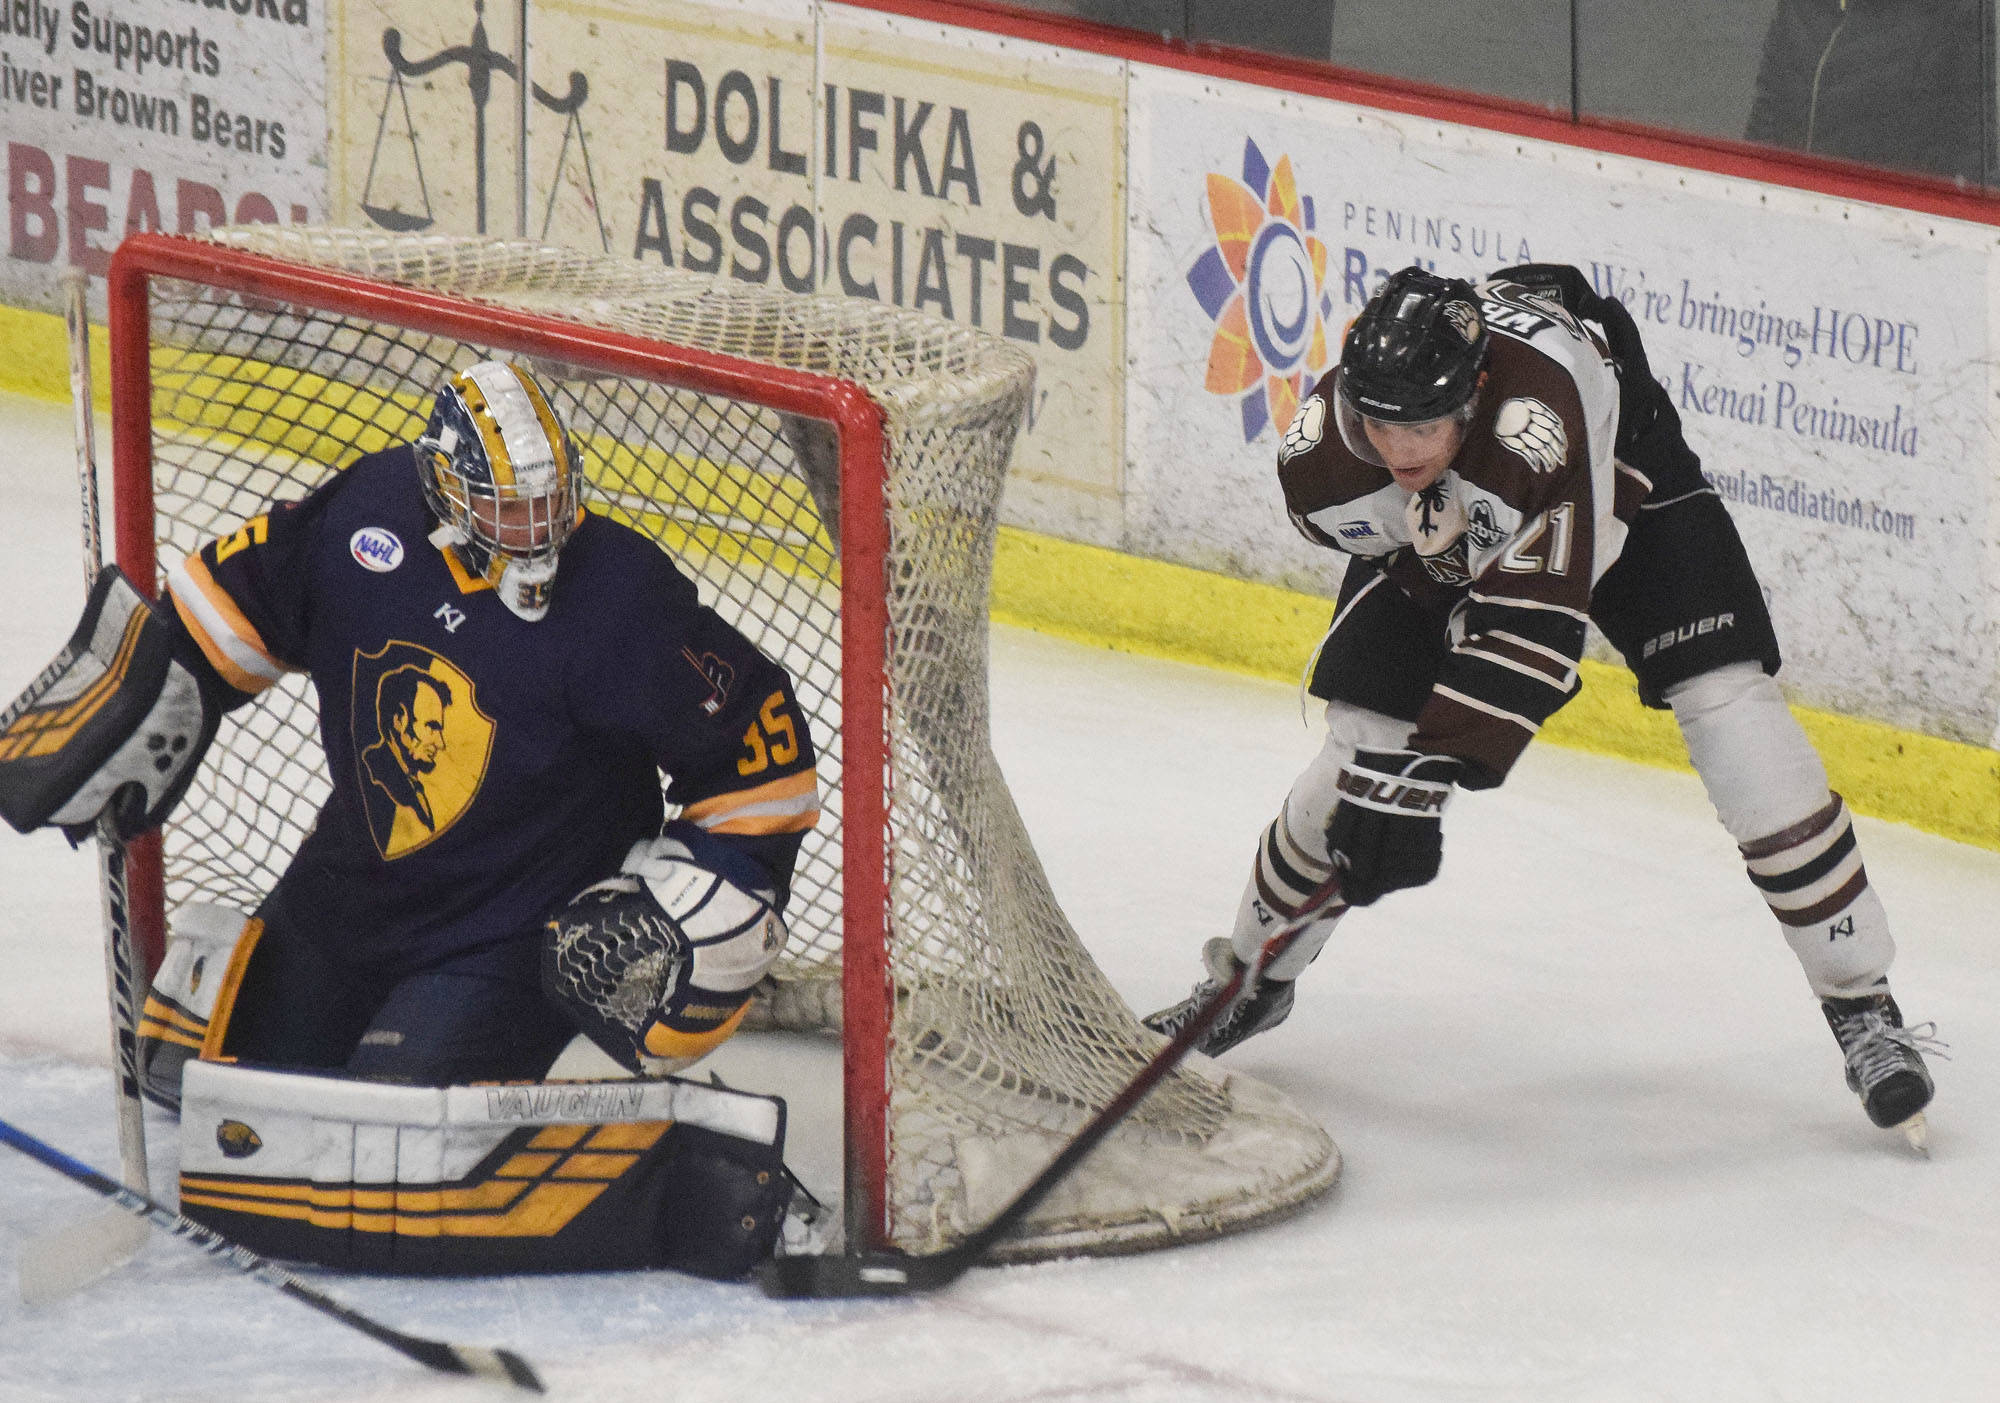 Kenai River’s Brendan White (right) tries a wraparound shot on Springfield goalie Jack Williams, Thursday night in a North American Hockey League contest against the Springfield (Illinois) Jr. Blues at the Soldotna Regional Sports Complex. (Photo by Joey Klecka/Peninsula Clarion)